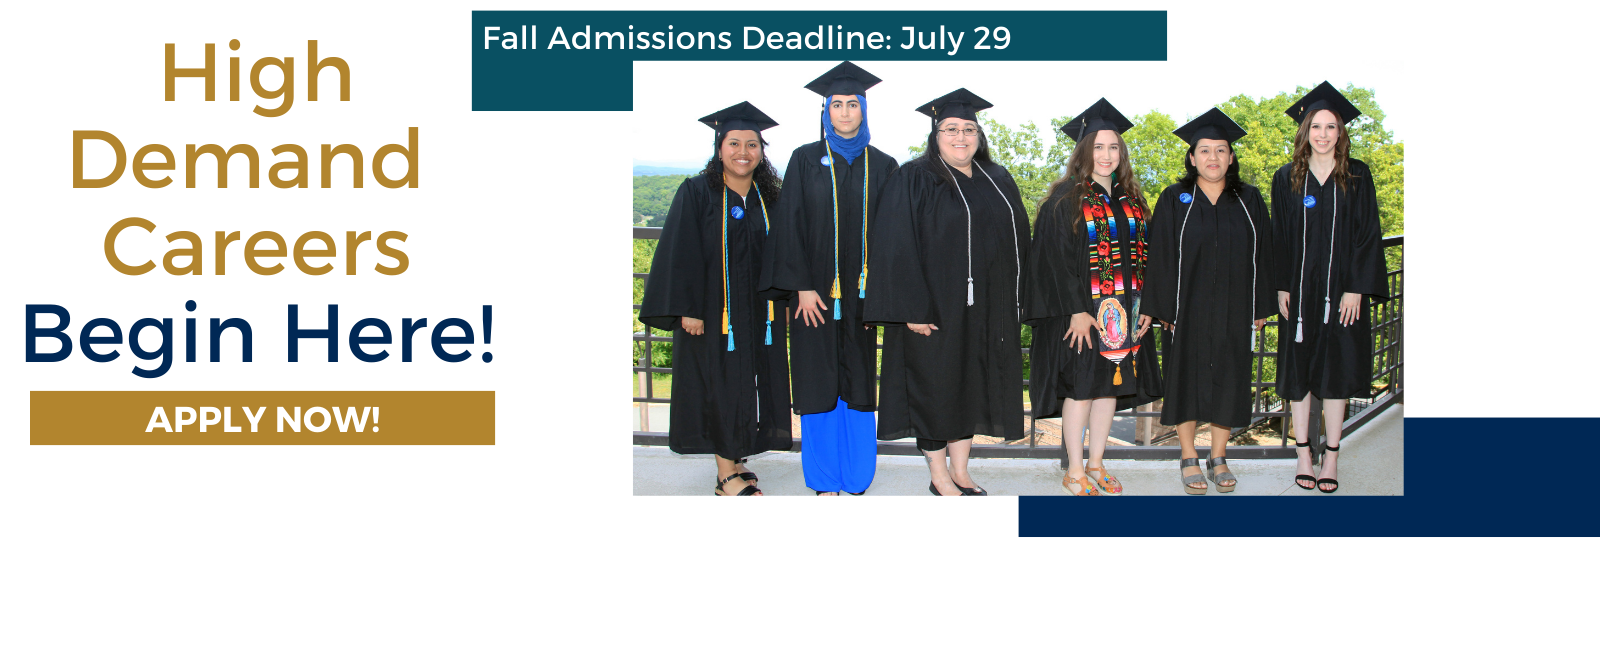 High Demand Careers Begin Here! Automotive Collision 
Fall Admissions Deadline: July 29